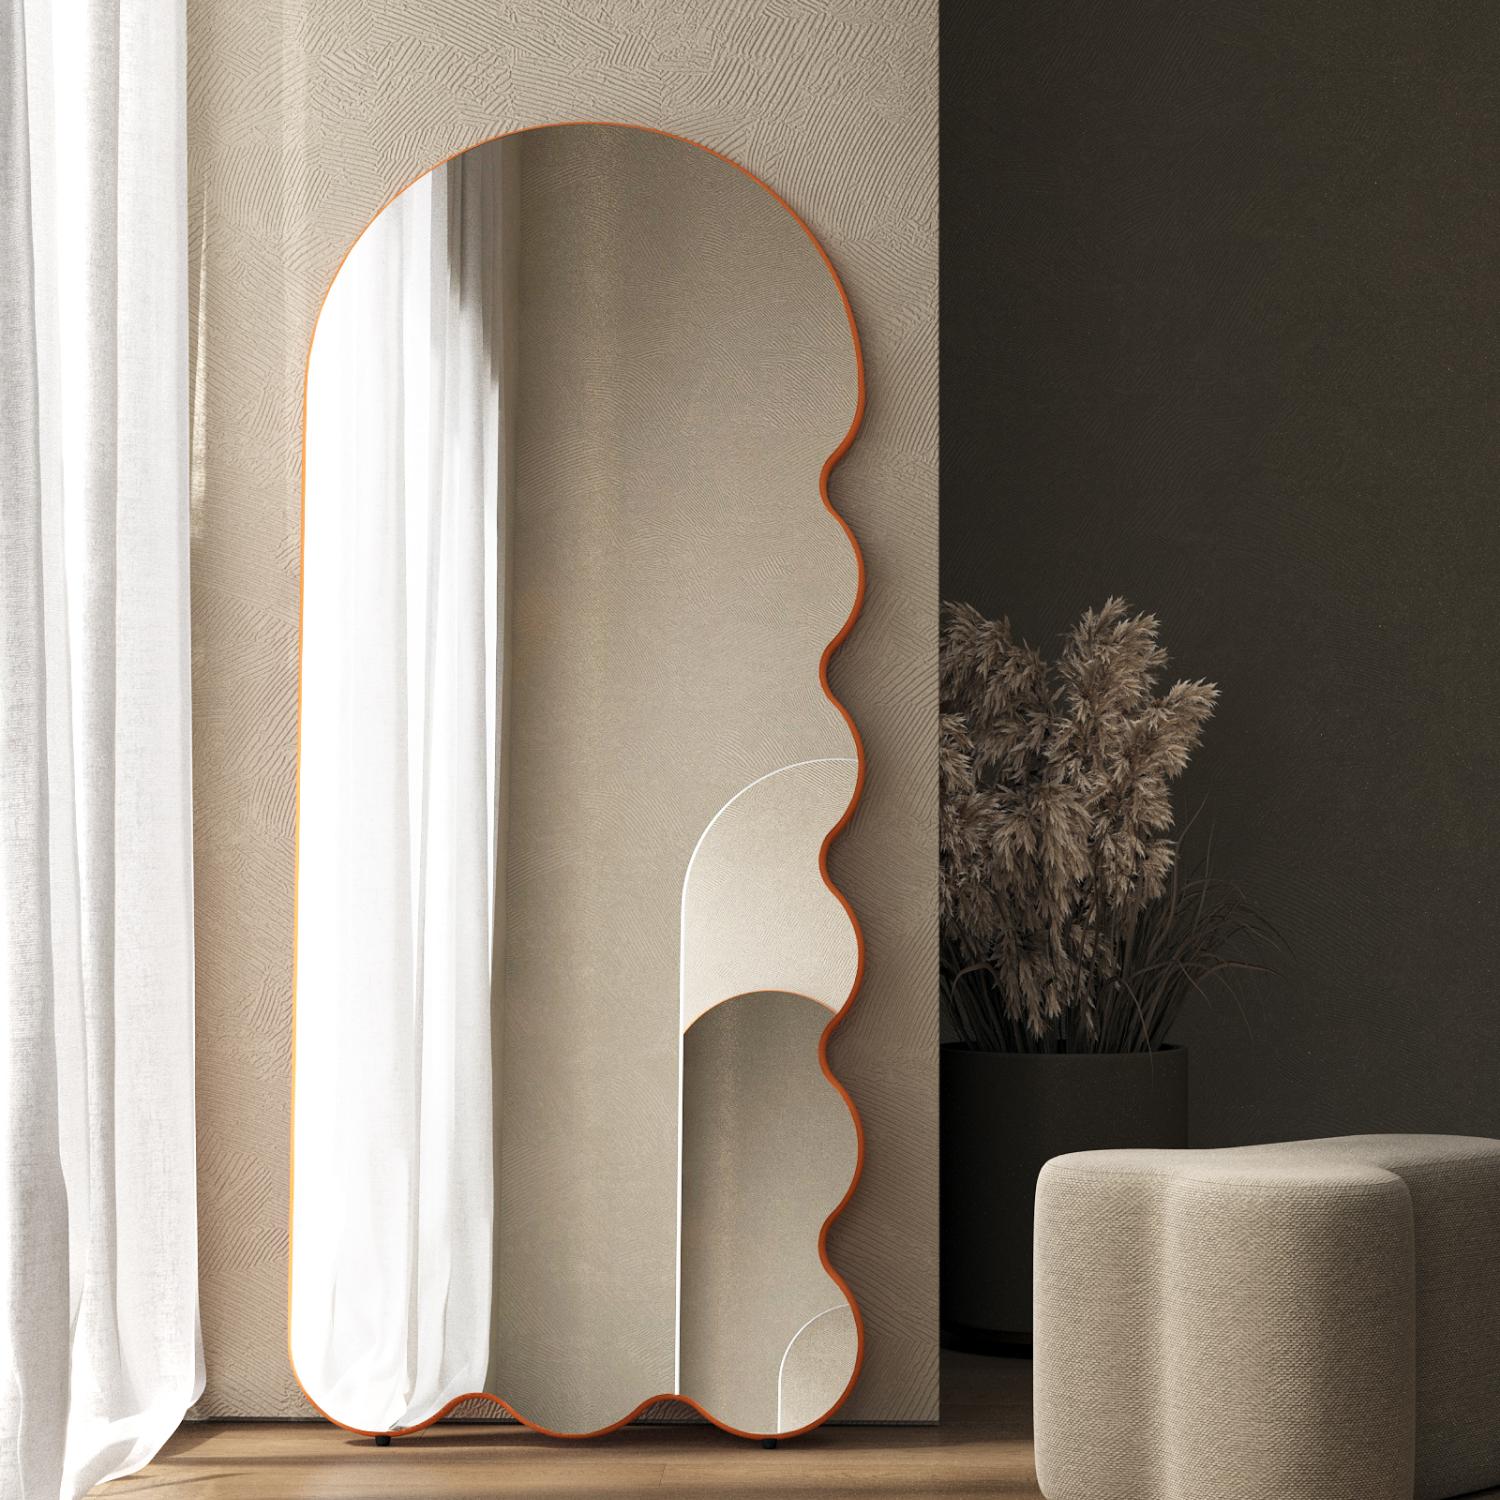 Contemporary Mirror 'Archvyli R8 + L8' by Oitoproducts.

Dimensions (each):
W 78 cm x H 180 cm x D 4 cm
W 37 in x H 71 in x D 1.3 in

Materials: Painted ecological water paint MDF, silver glass mirror, special rubber feet.

About
A full-length art